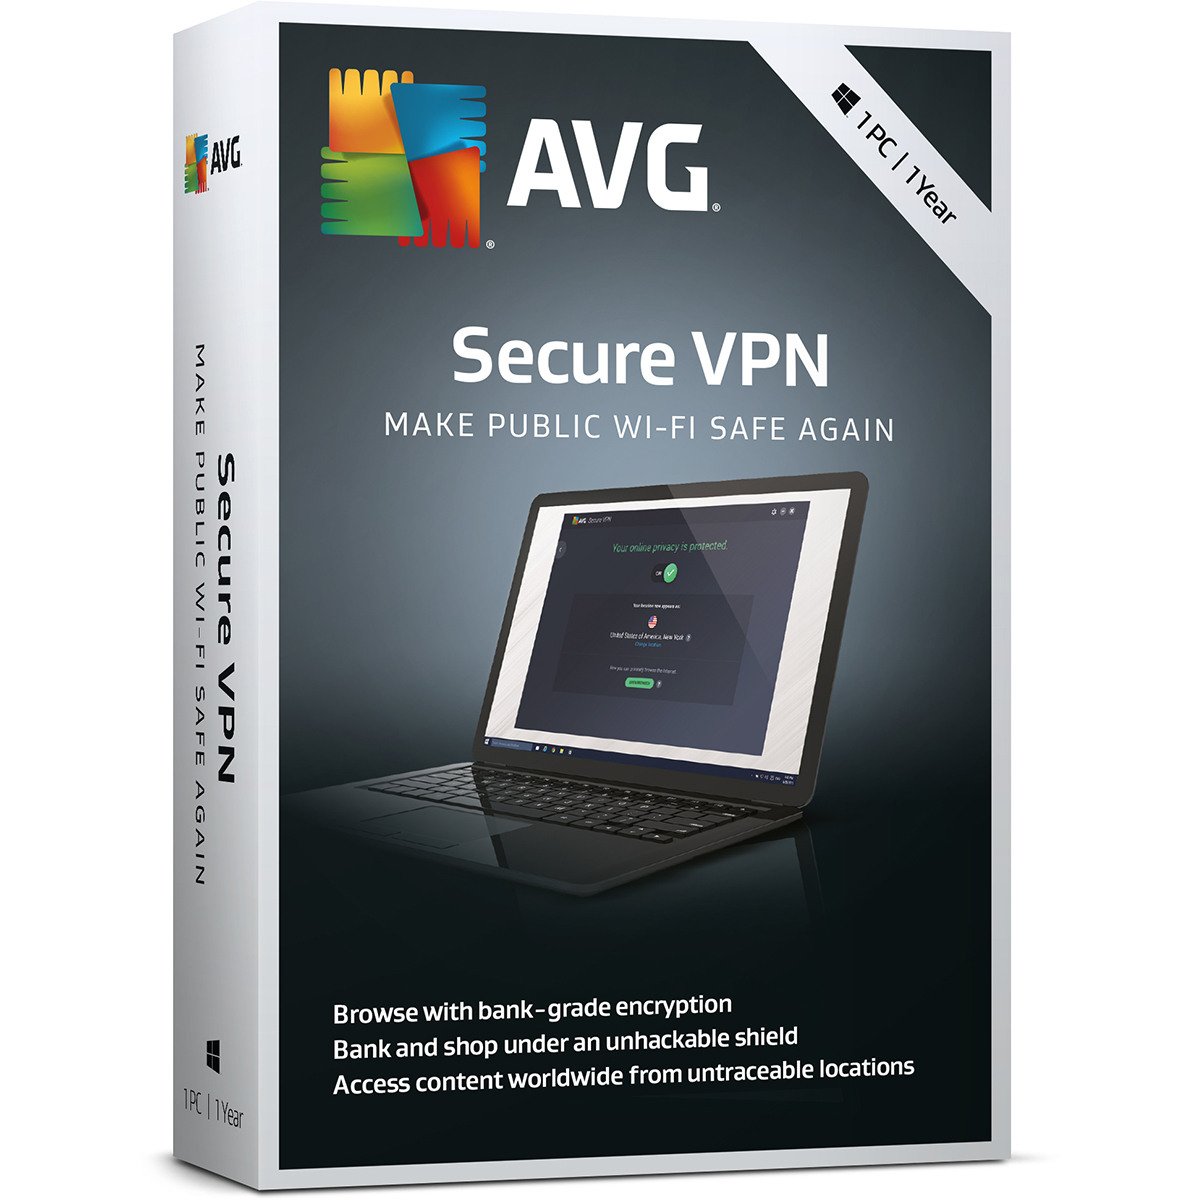 AVG Secure VPN 3 Years License ( 1 Active Connection at a time )